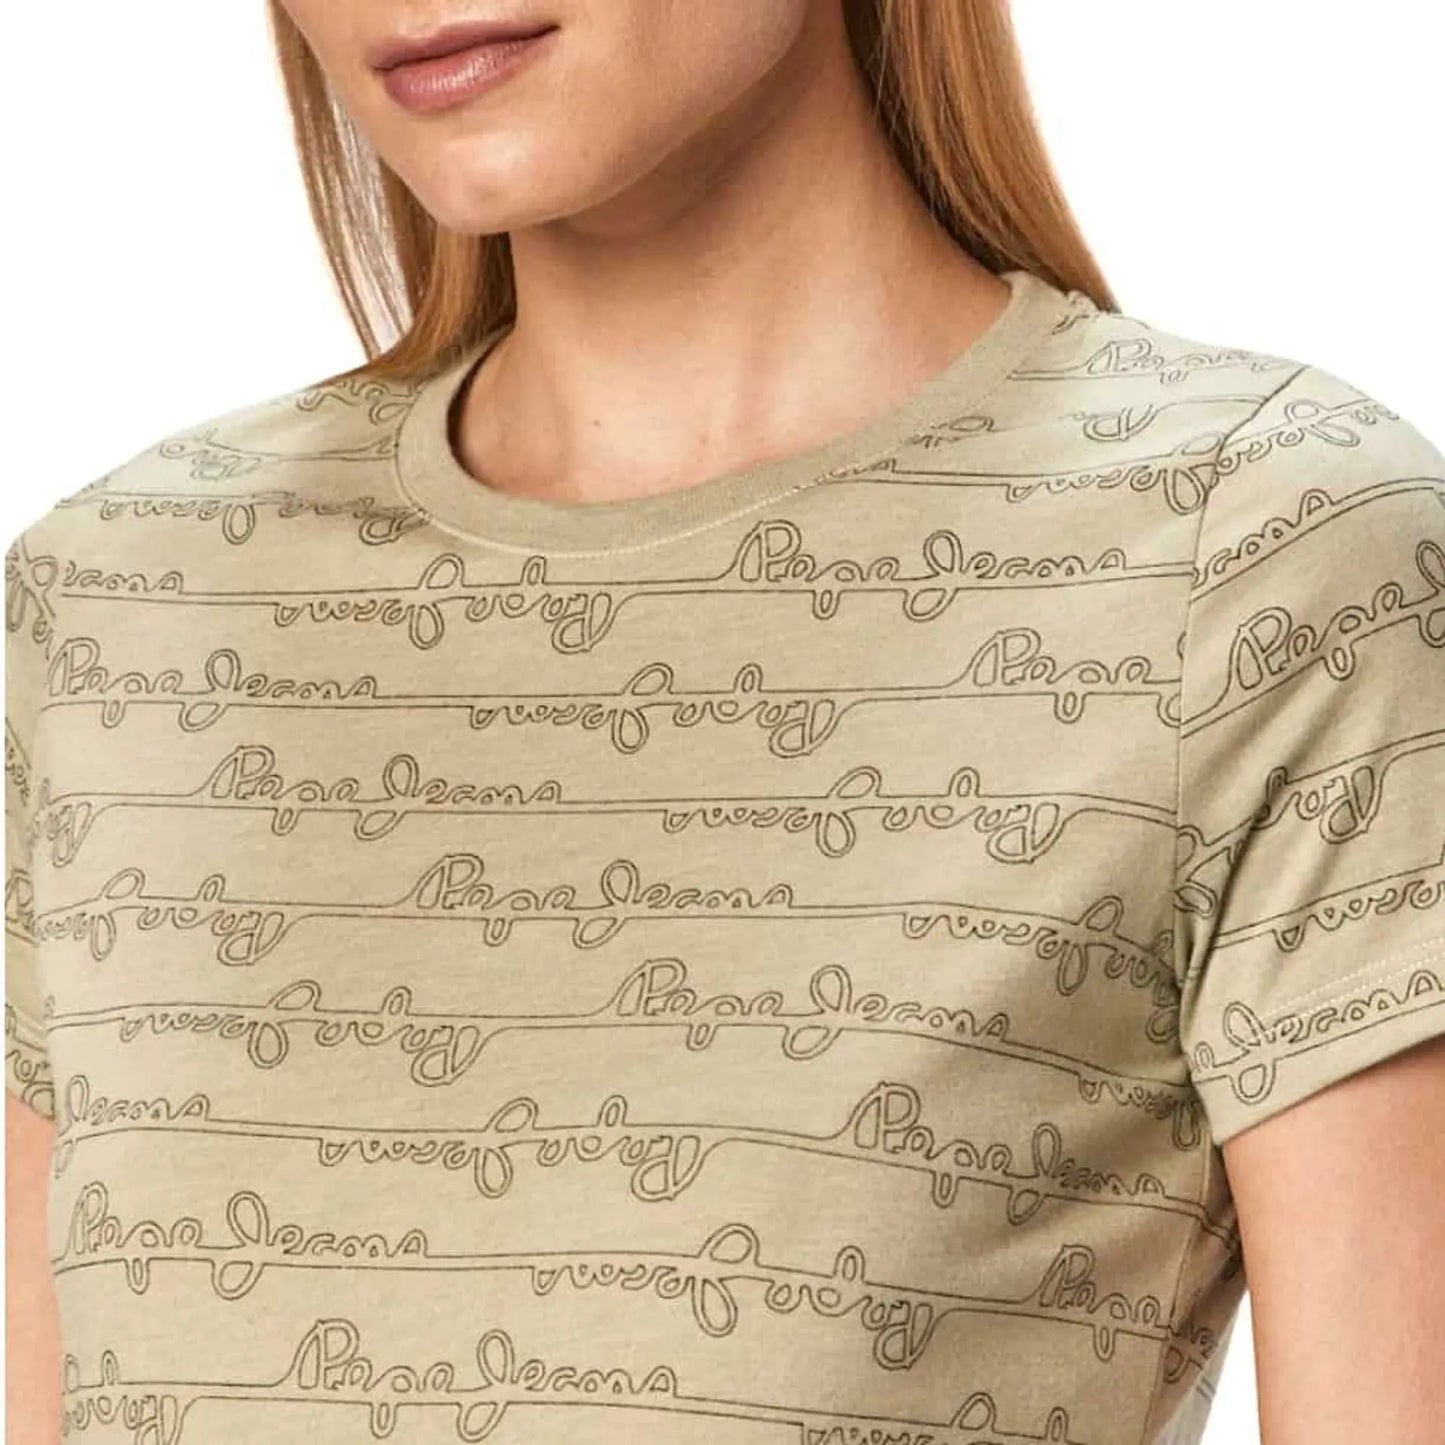 Pepe Jeans T-shirt Pepe Jeans